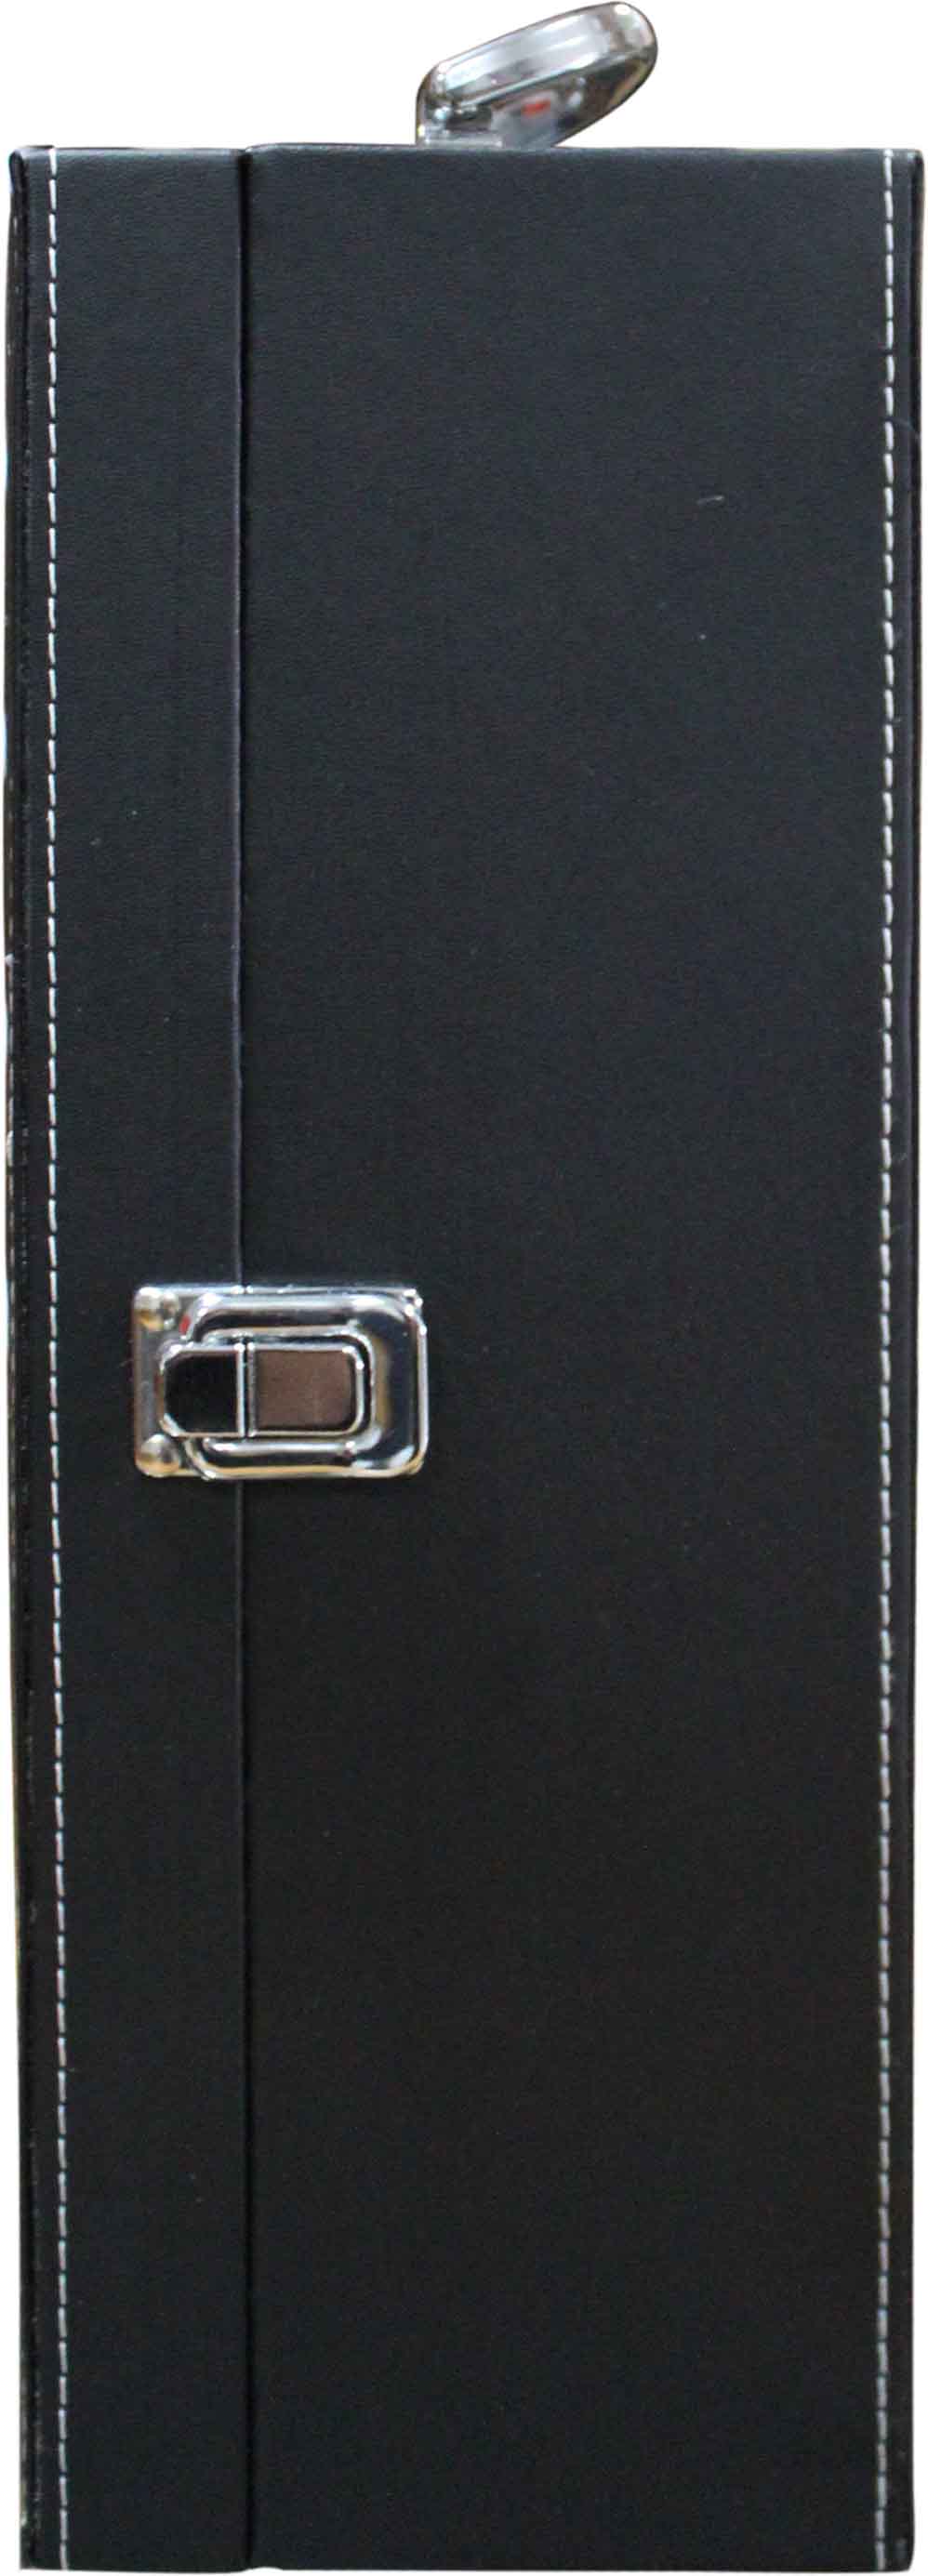 Single leather box with accessory